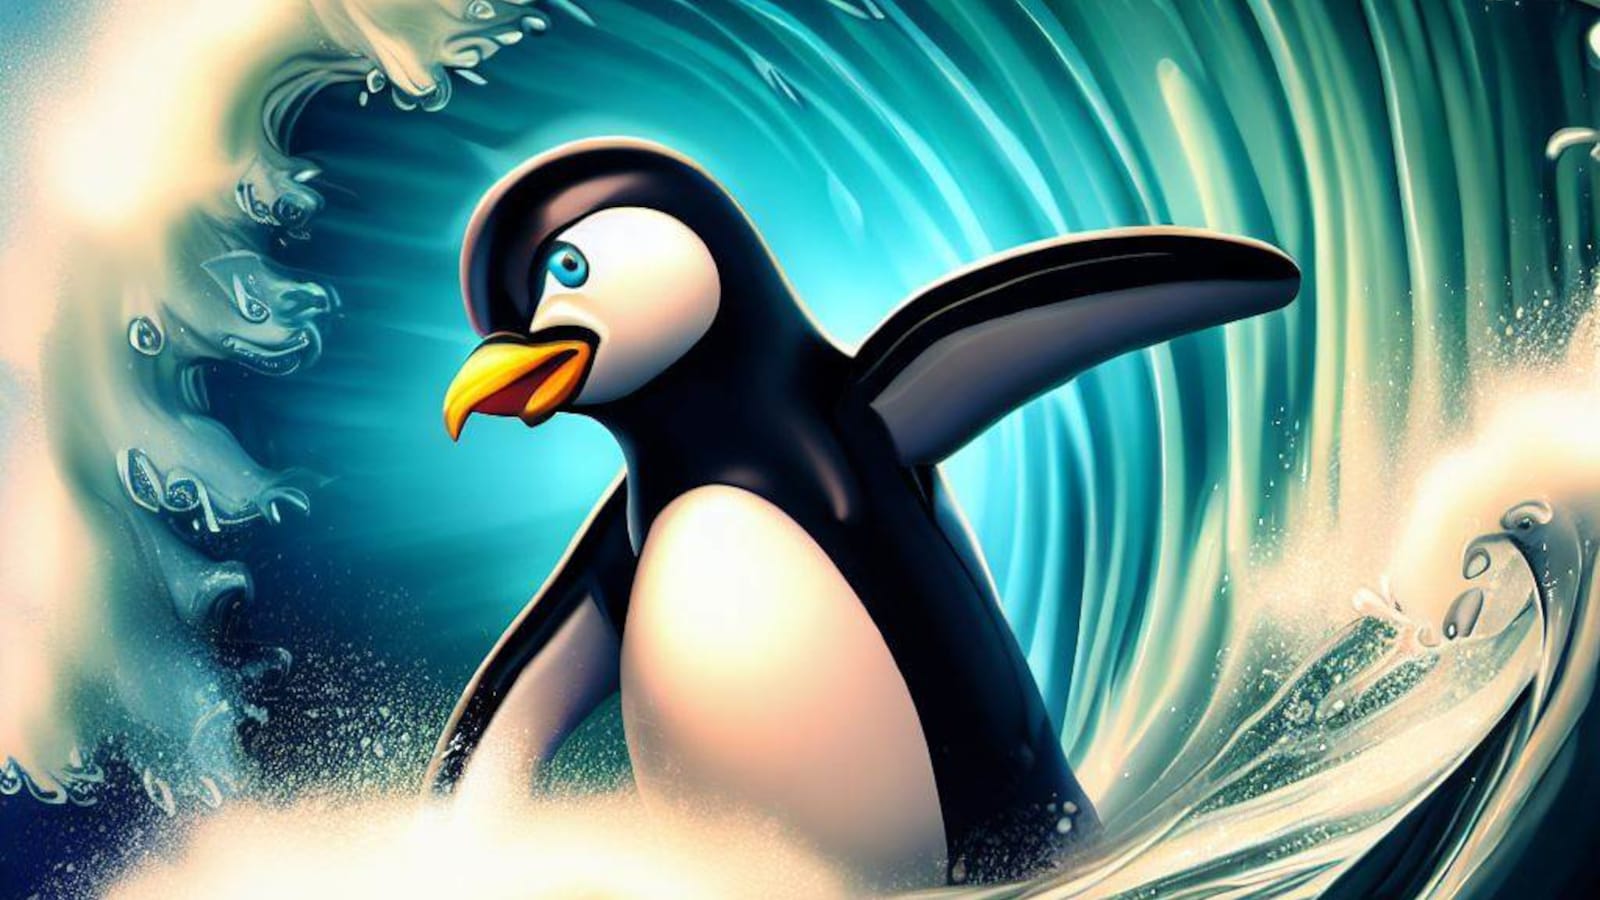 Hackers Infect Linux SSH Servers with Tsunami Botnet Malware